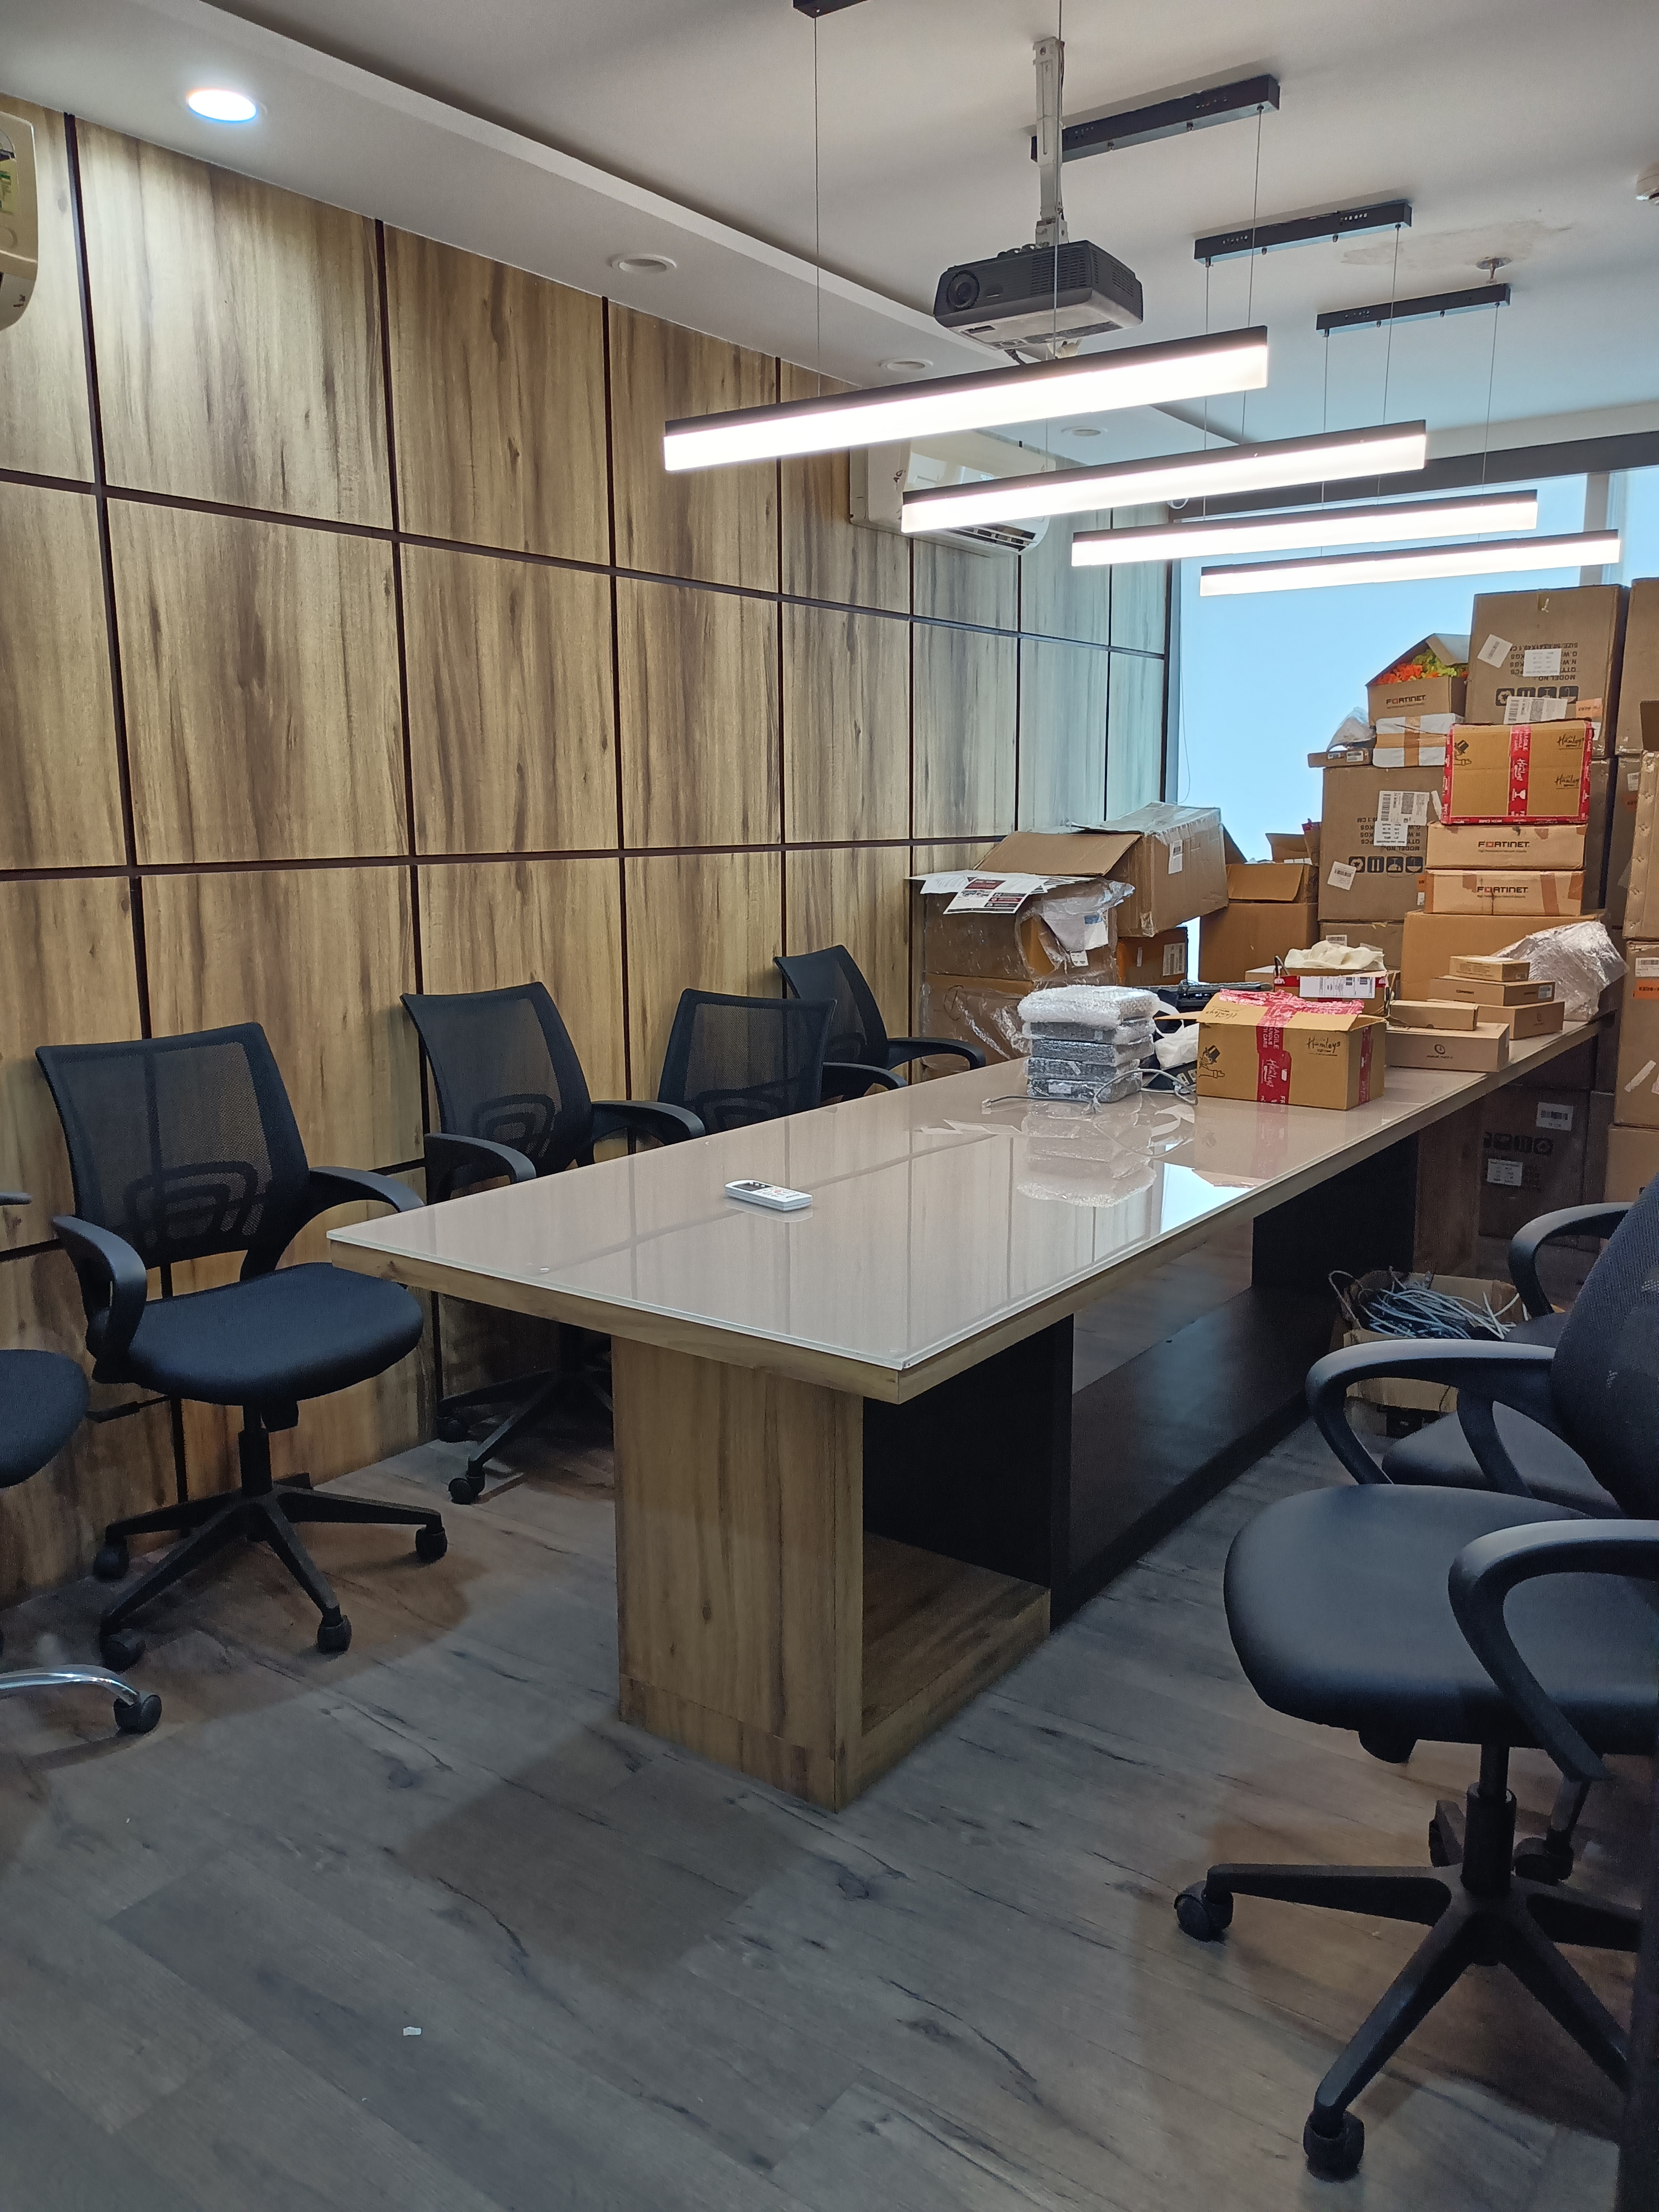 FULLY FURNISHED OFFICE ON RENT